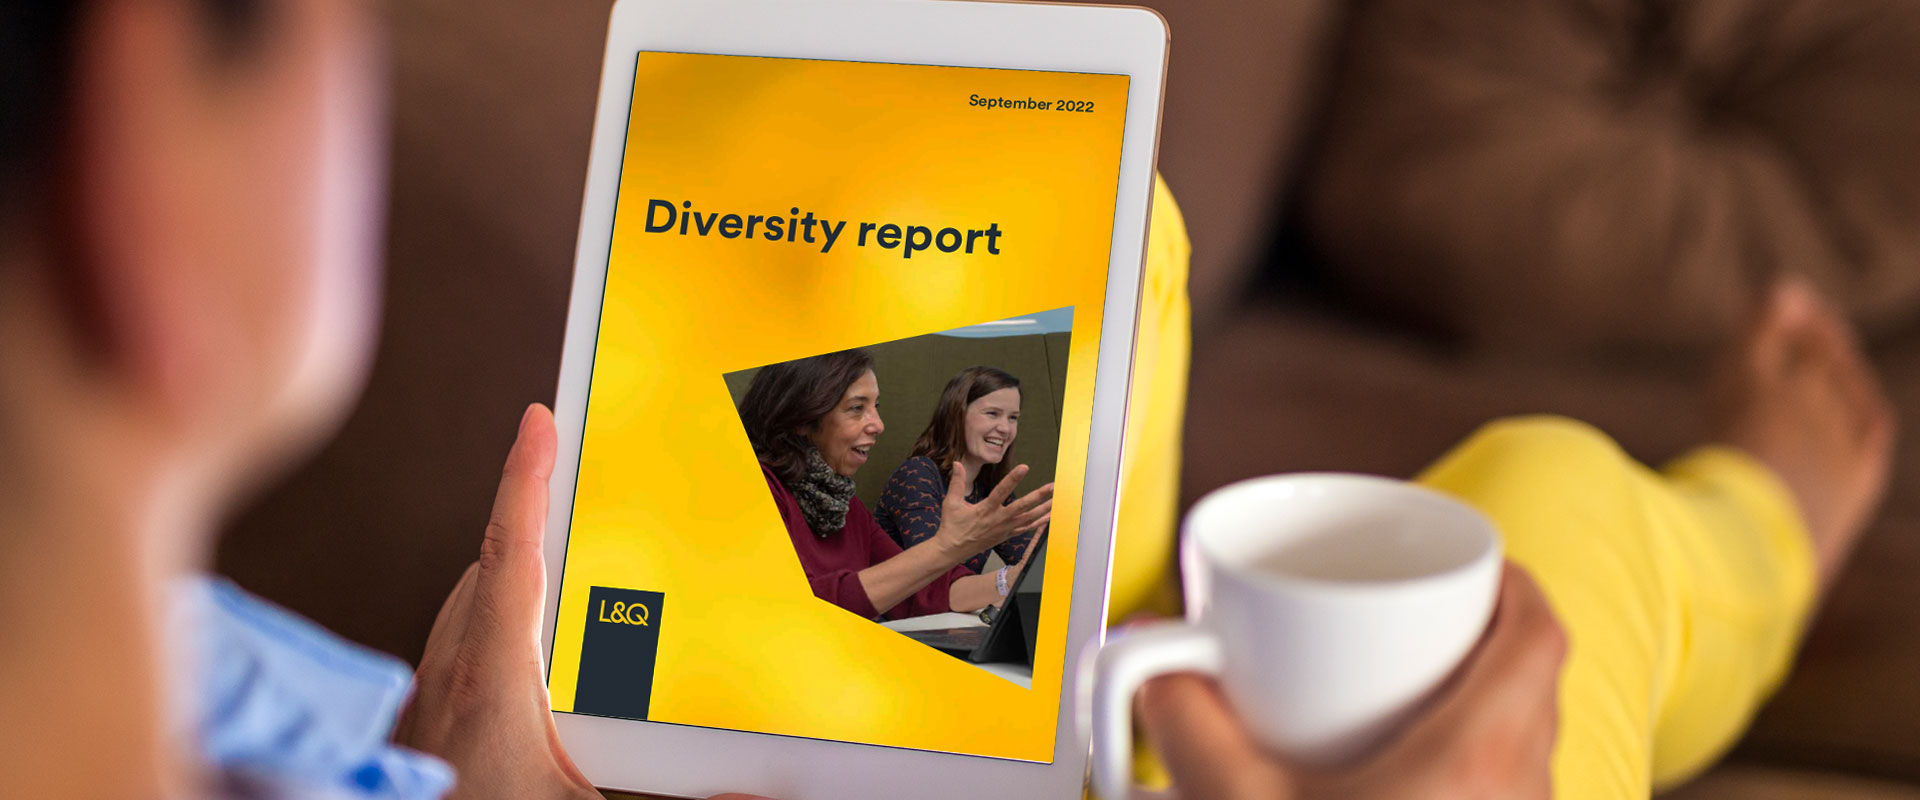 A woman looking at L&Q's Diversity report on a tablet device